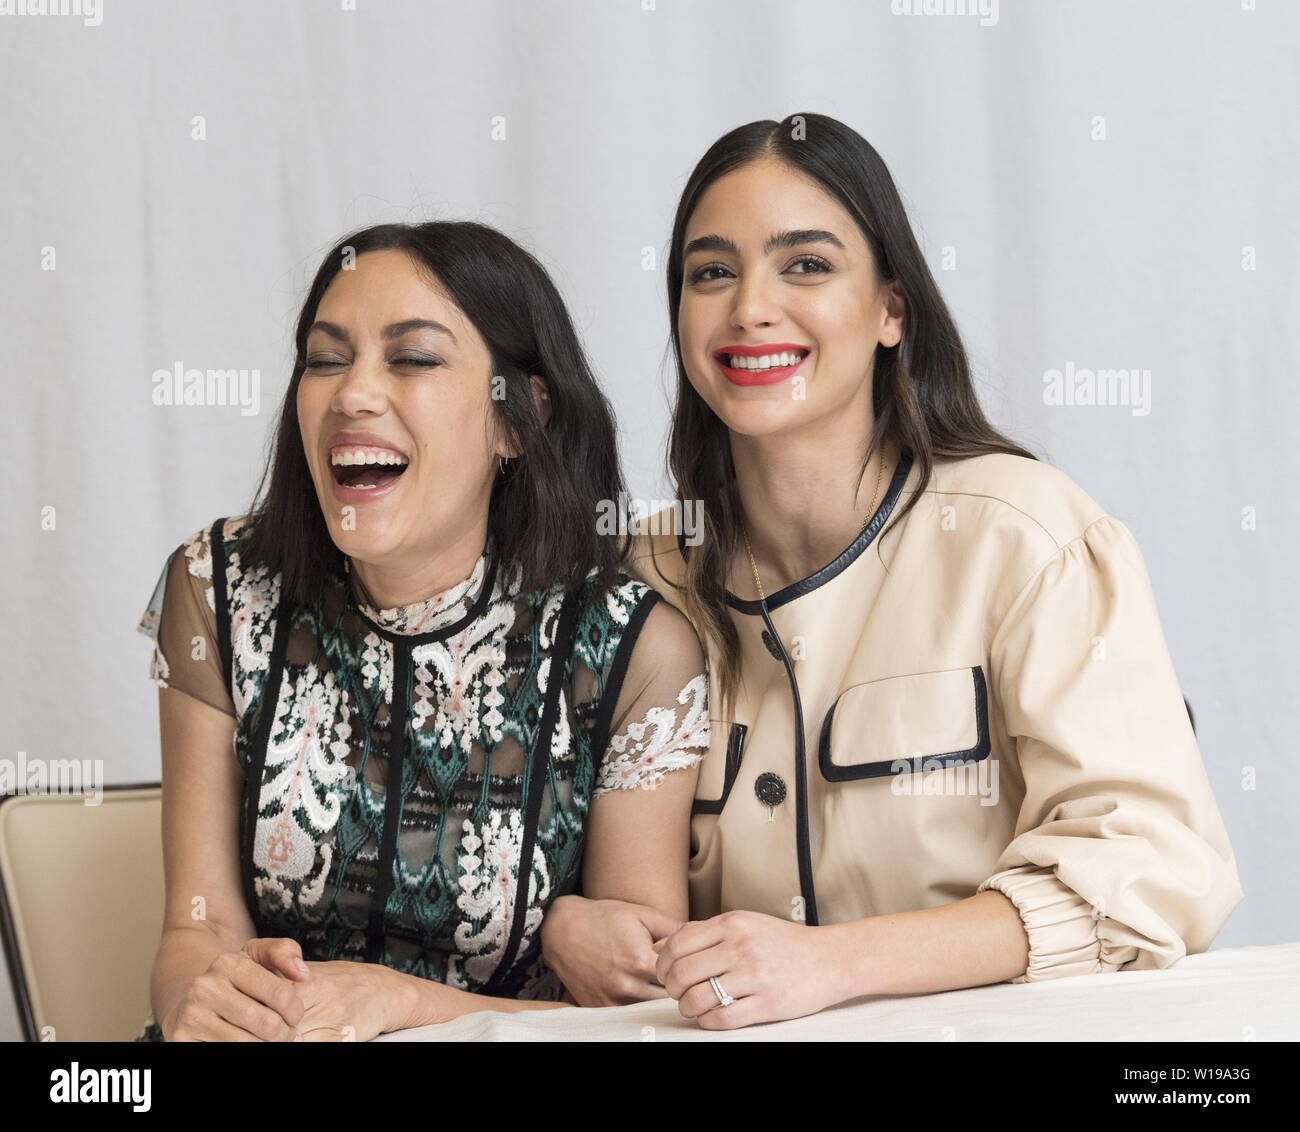 Melissa Barrera and Mishel Prada, who stars in 'Vida', at the Four Seasons  Hotel in Beverly Hills. 2019/06/01. Credit: Action Press/MediaPunch ***FOR  USA ONLY*** Stock Photo - Alamy